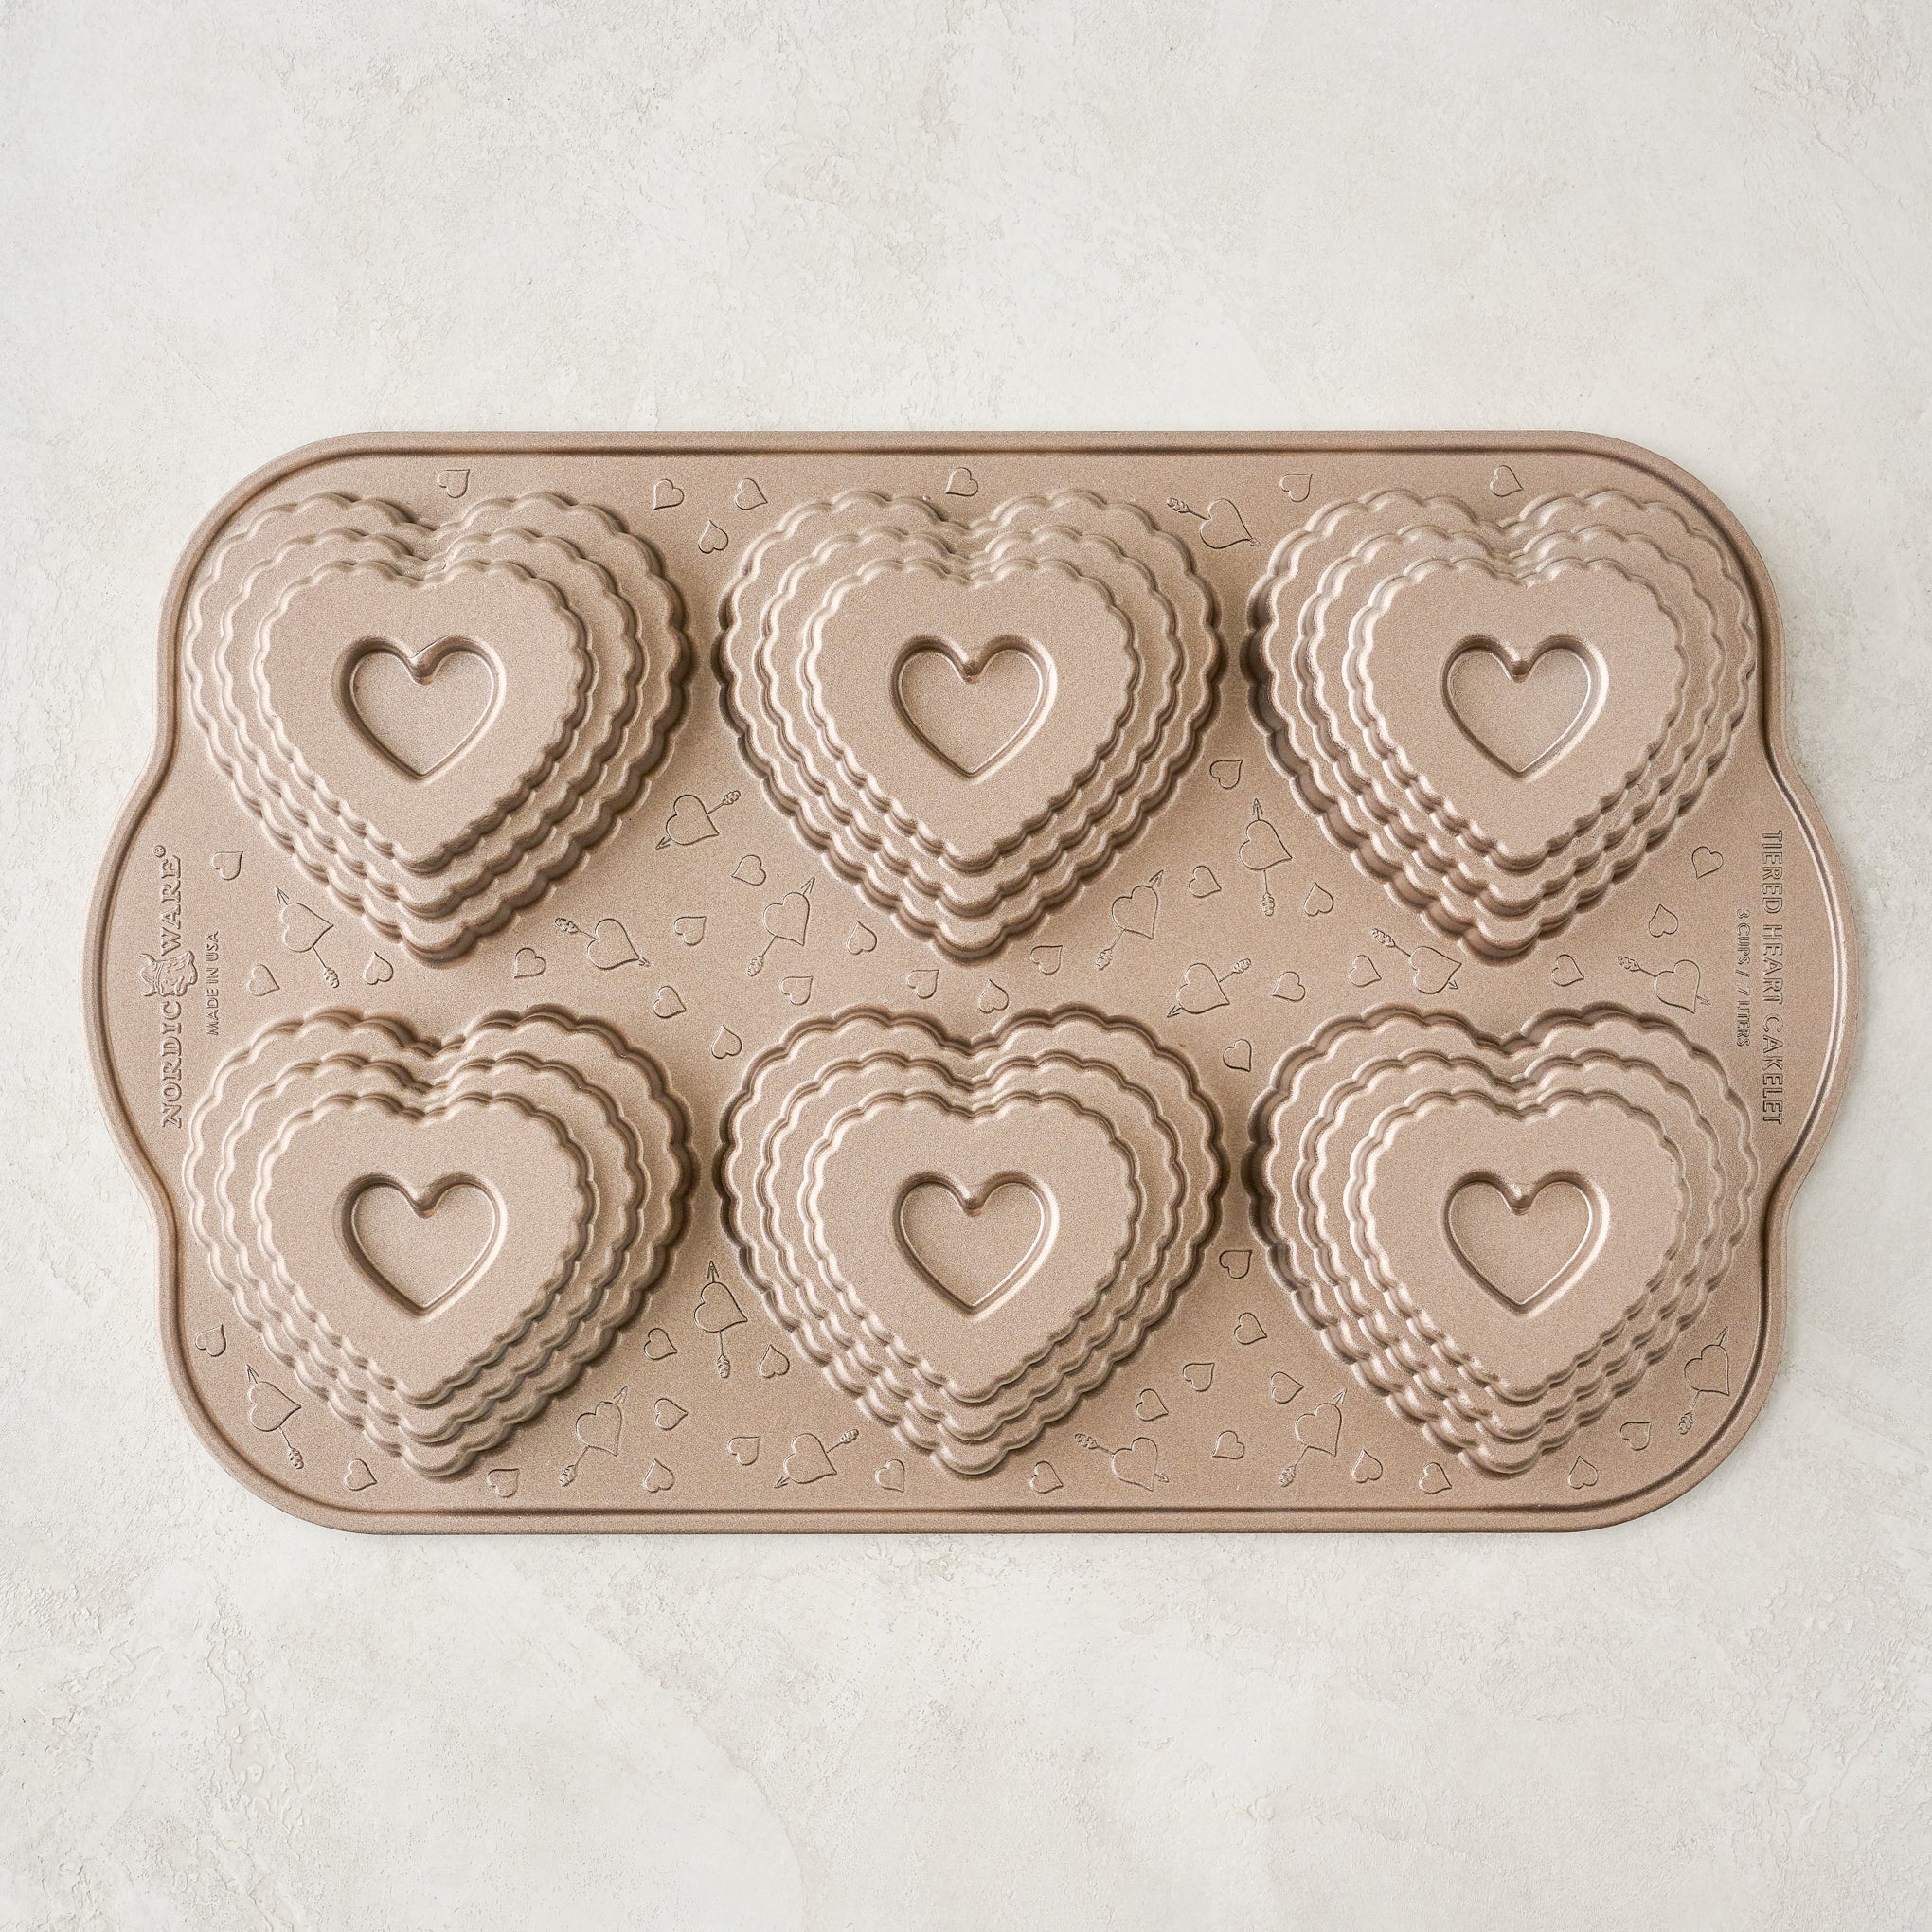 Tiered Heart Cakelet Pan On sale for $30.80, discounted from $44.00